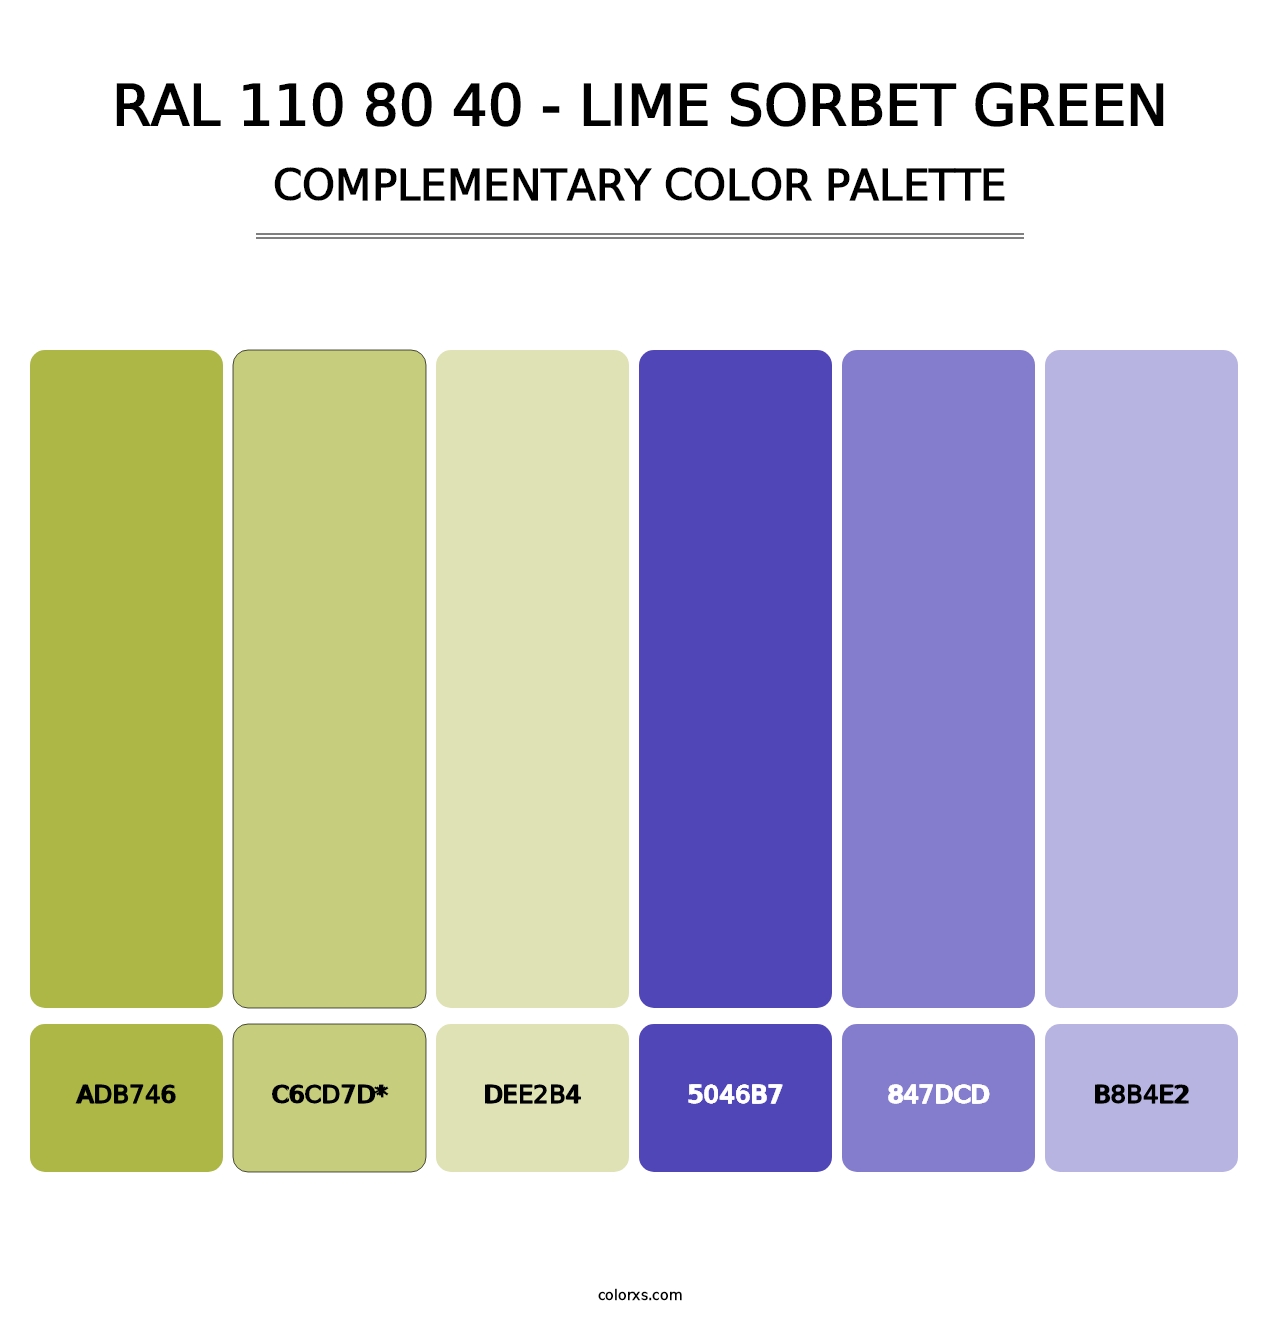 RAL 110 80 40 - Lime Sorbet Green - Complementary Color Palette